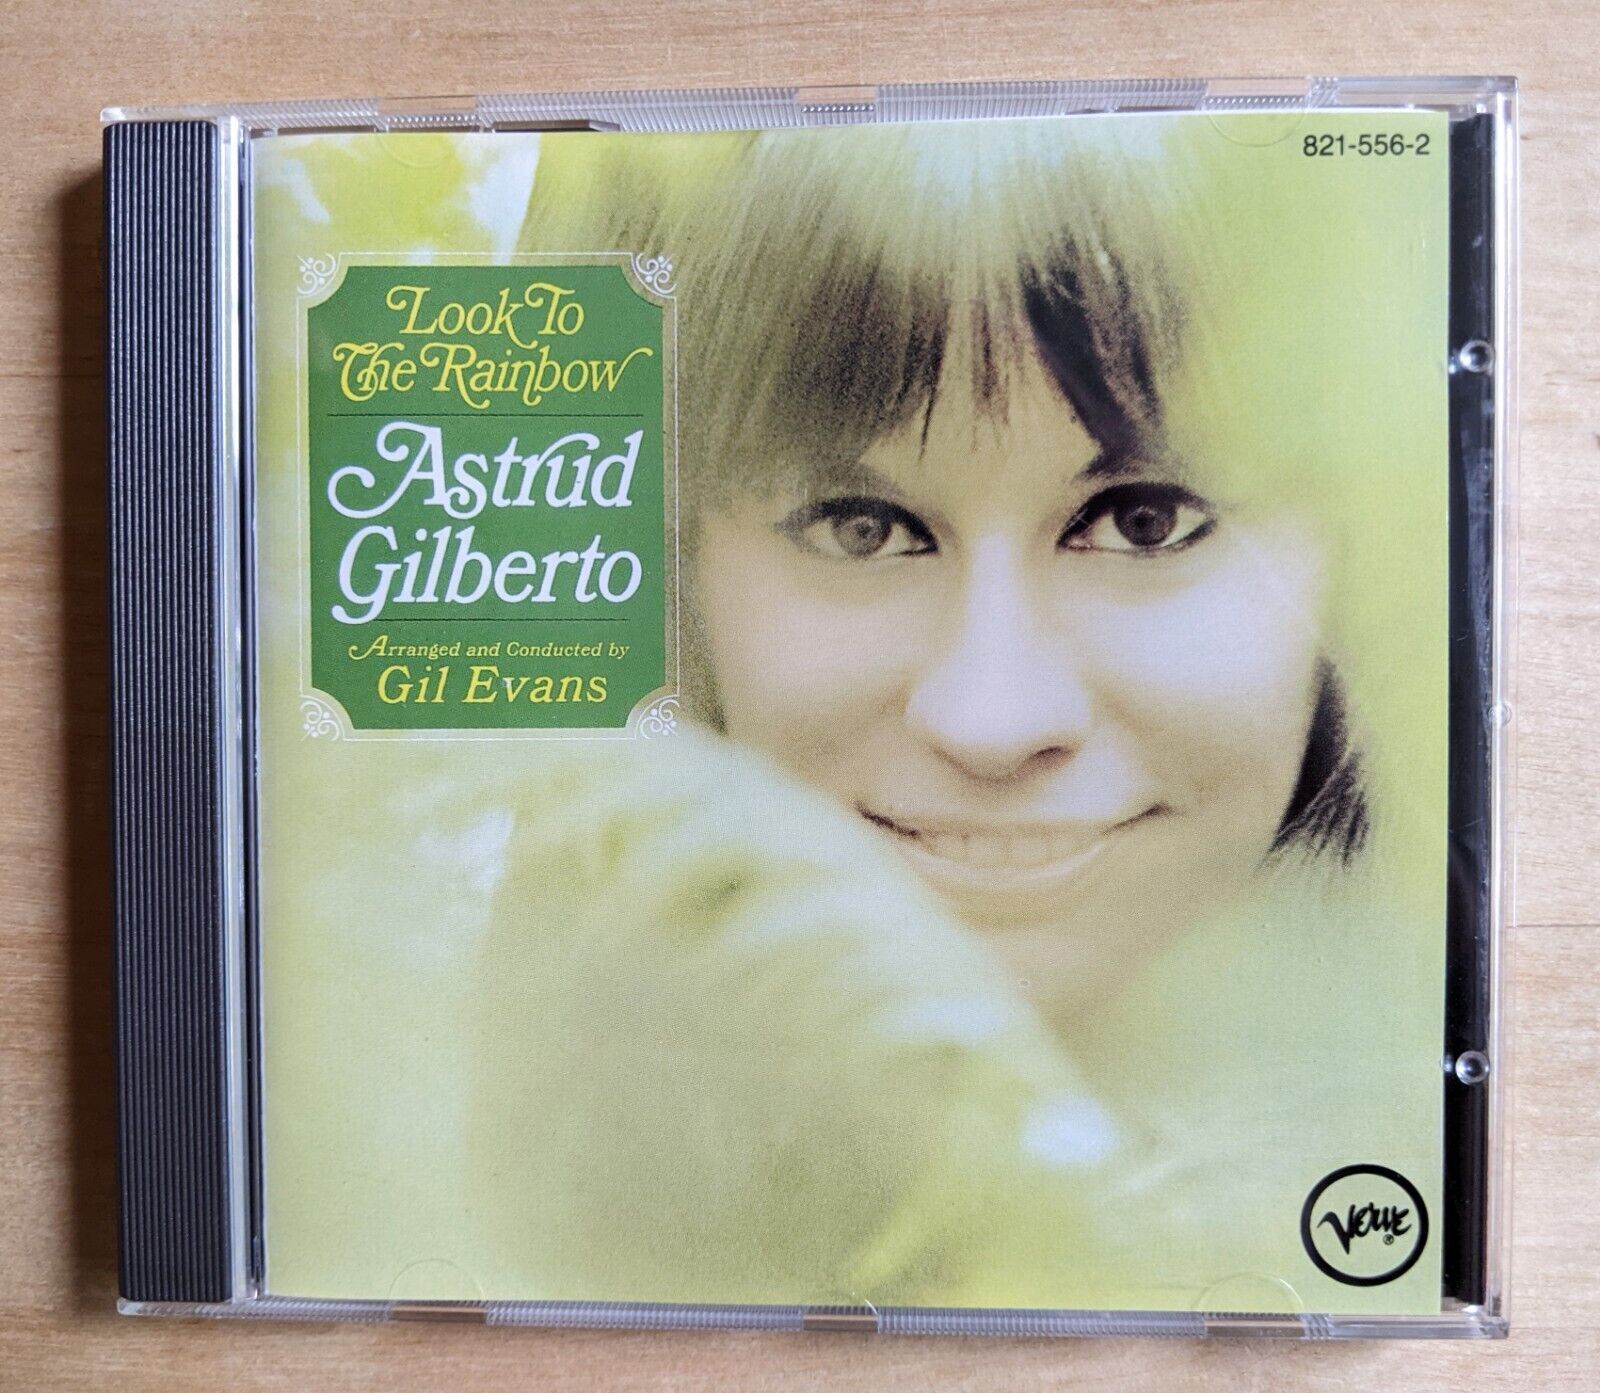 ASTRUD GILBERTO Look to the Rainbow ORIG VERVE CD 821 556-2 West Germany